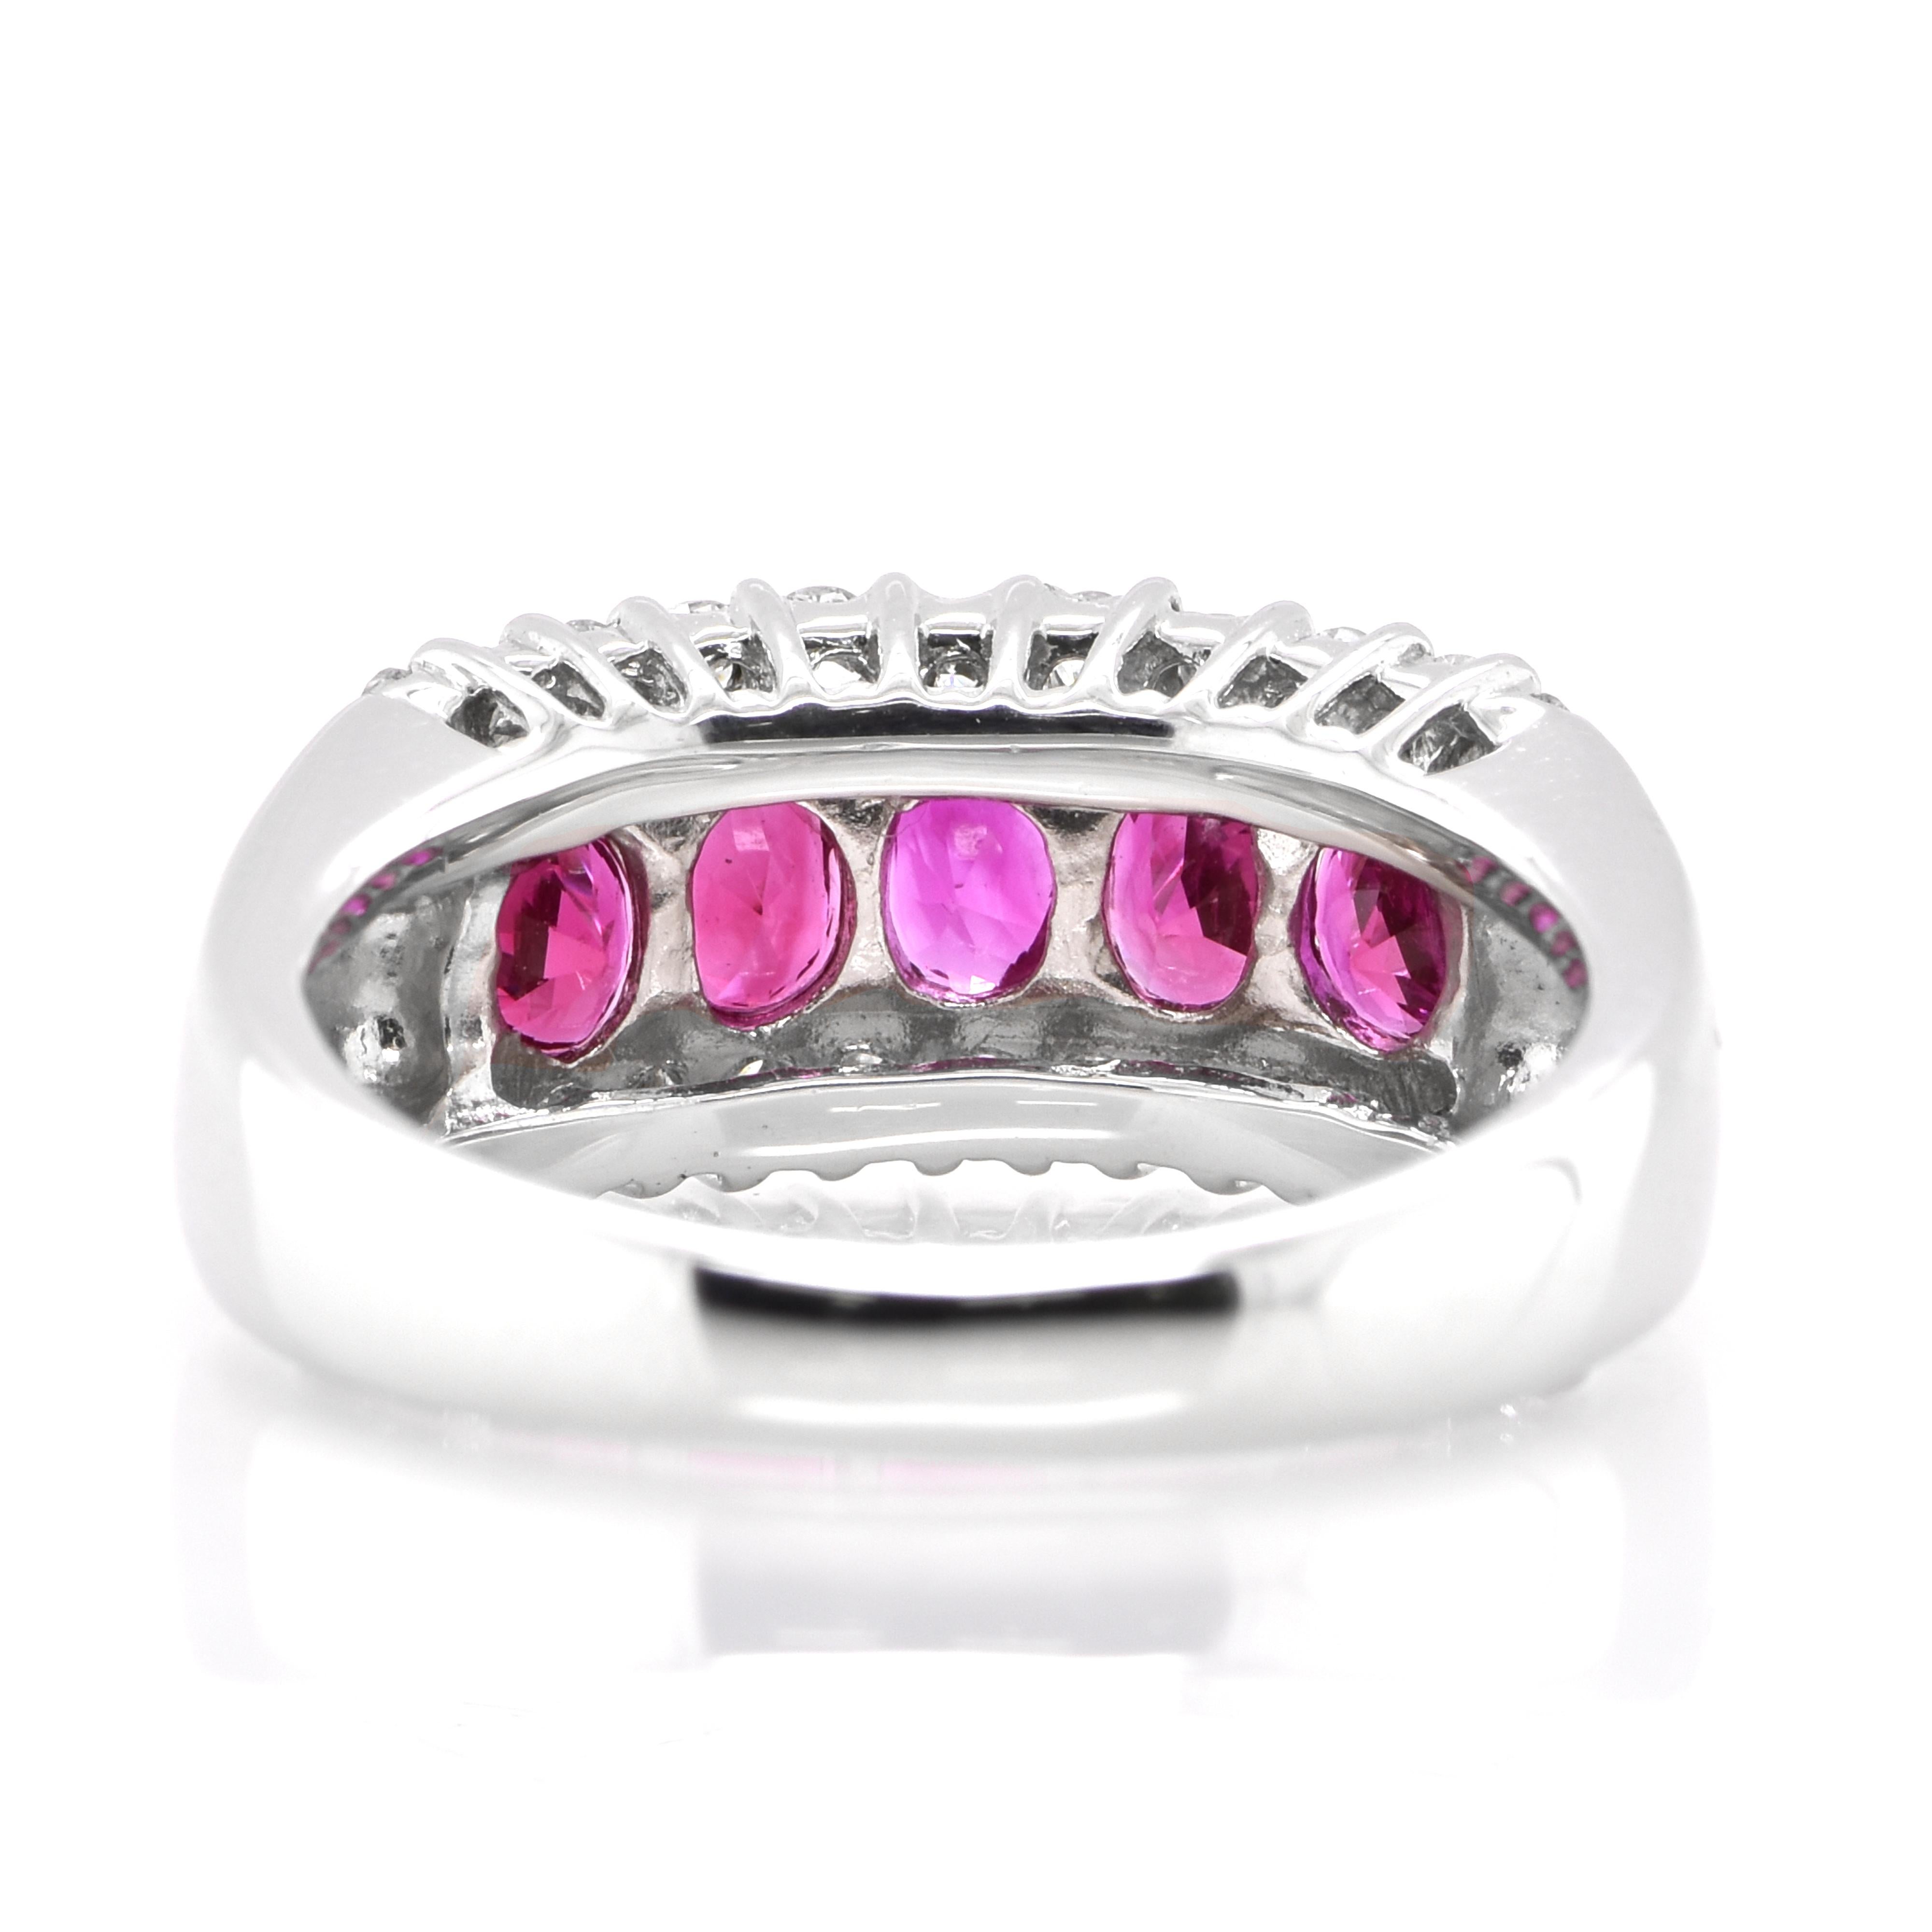 Women's 1.00 Carat Natural Oval Ruby & Diamond Half Eternity Band Ring Set in Platinum